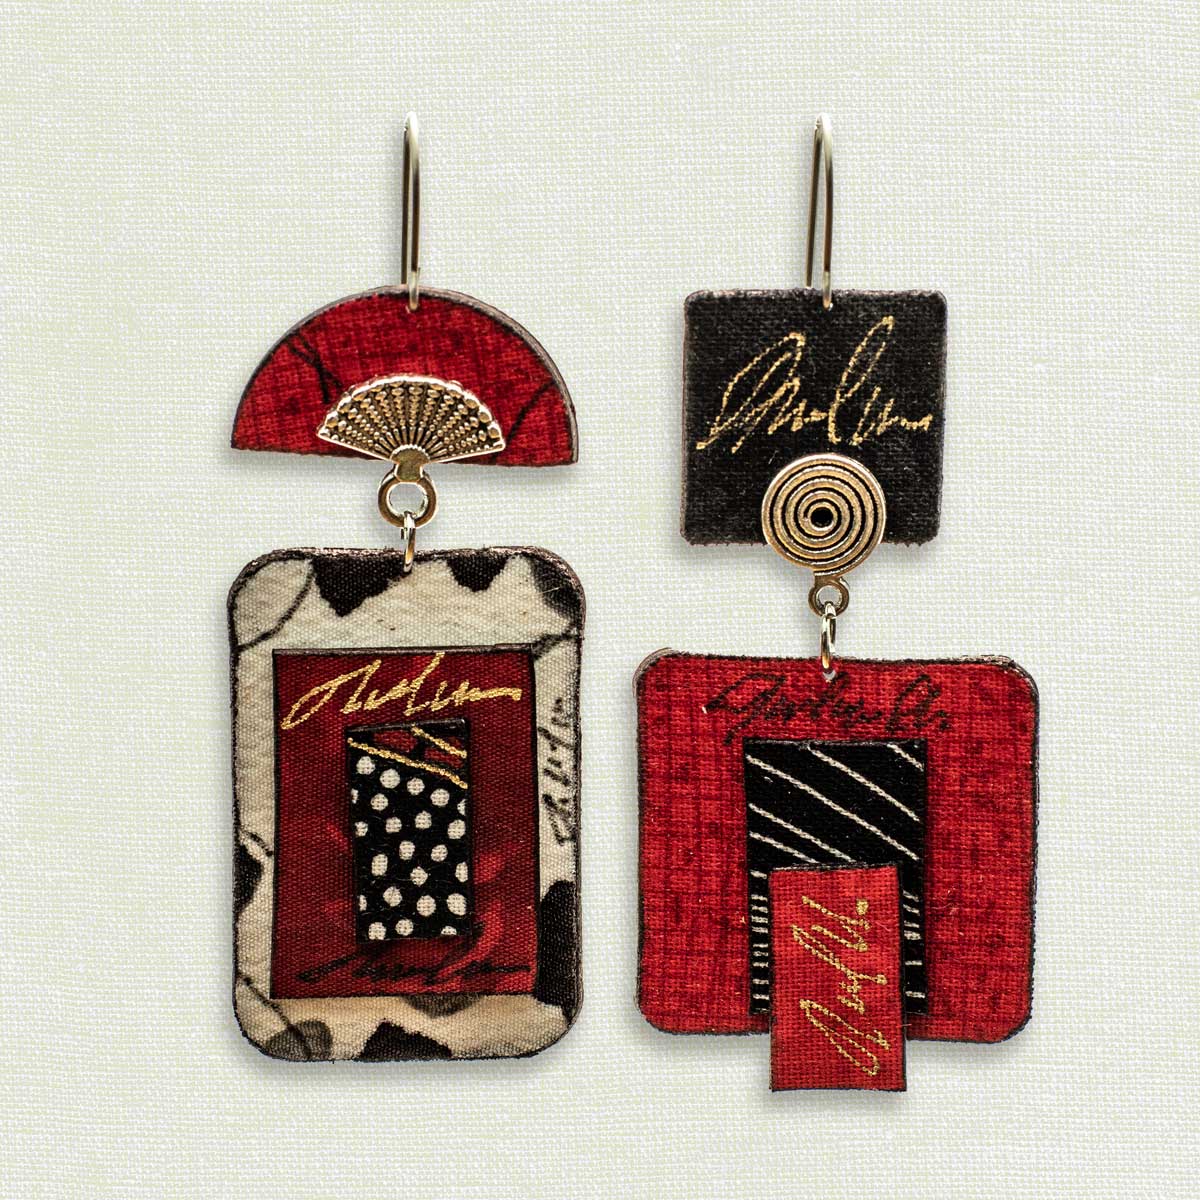 Asymmetric 2 tiered earrings hand painted by artist Suzanne Bellows for SuzanneBellowsJewelry.com. This pair is part of the Soft Collection and features striking black, white and red patterns.